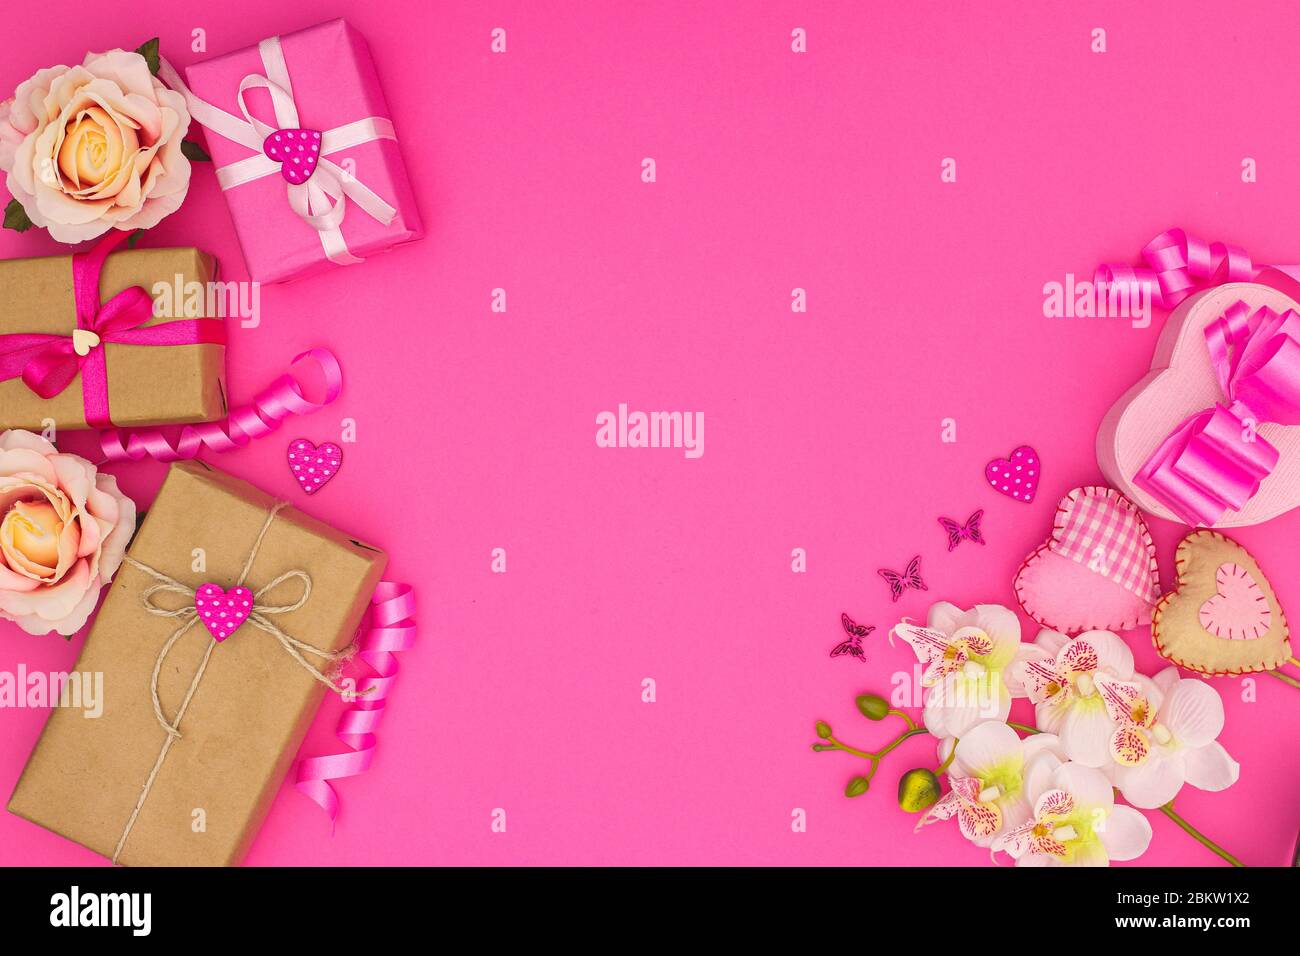 Romantic decoration with gifts for special day Stock Photo